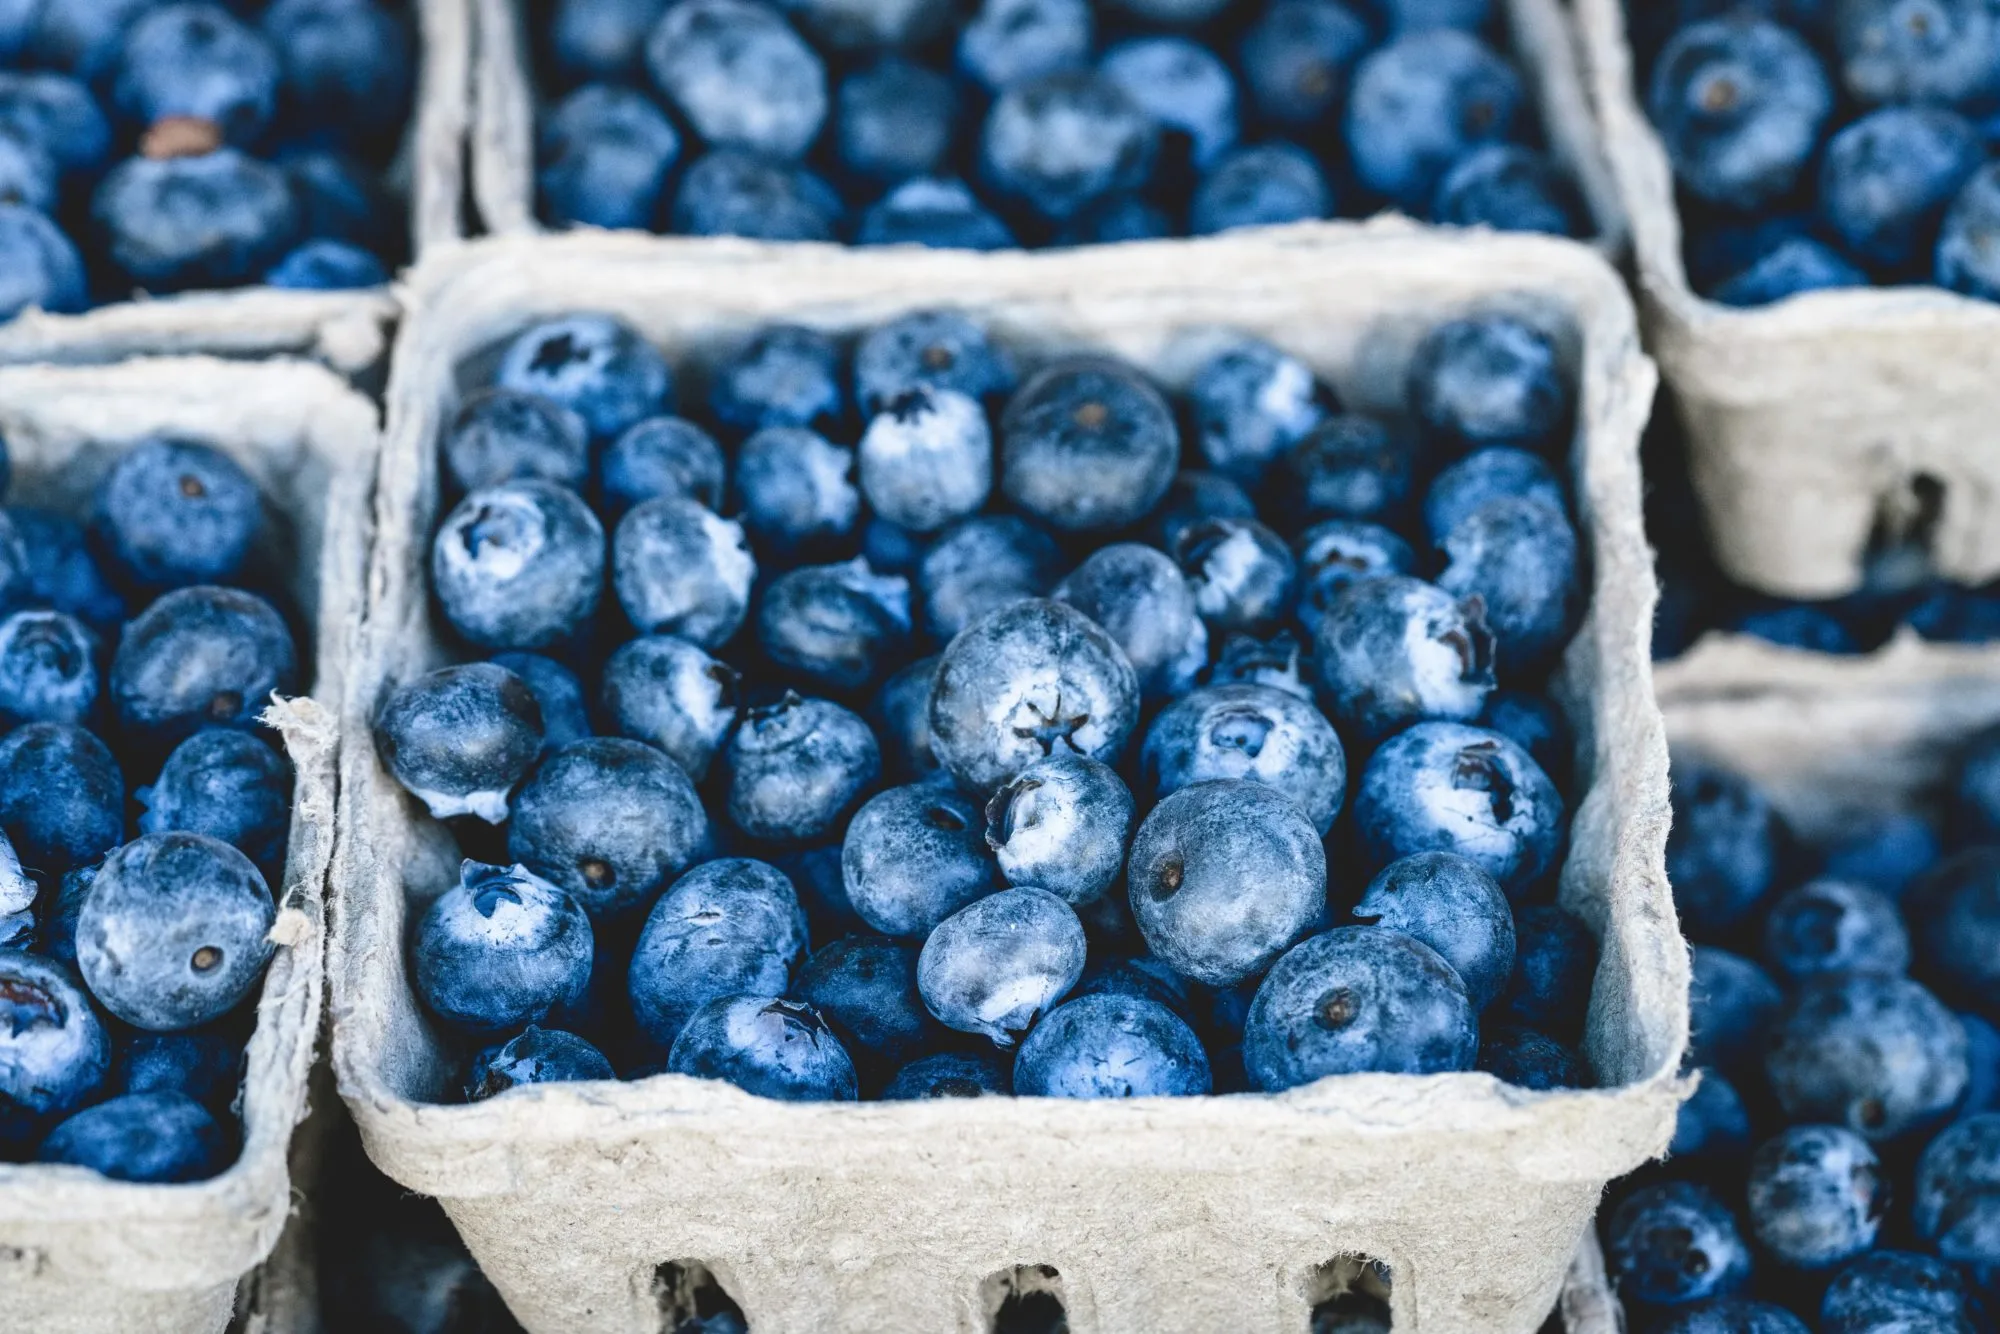 Wild Blueberries Improve Vascular Function and Cognitive Performance in Healthy Older Adults